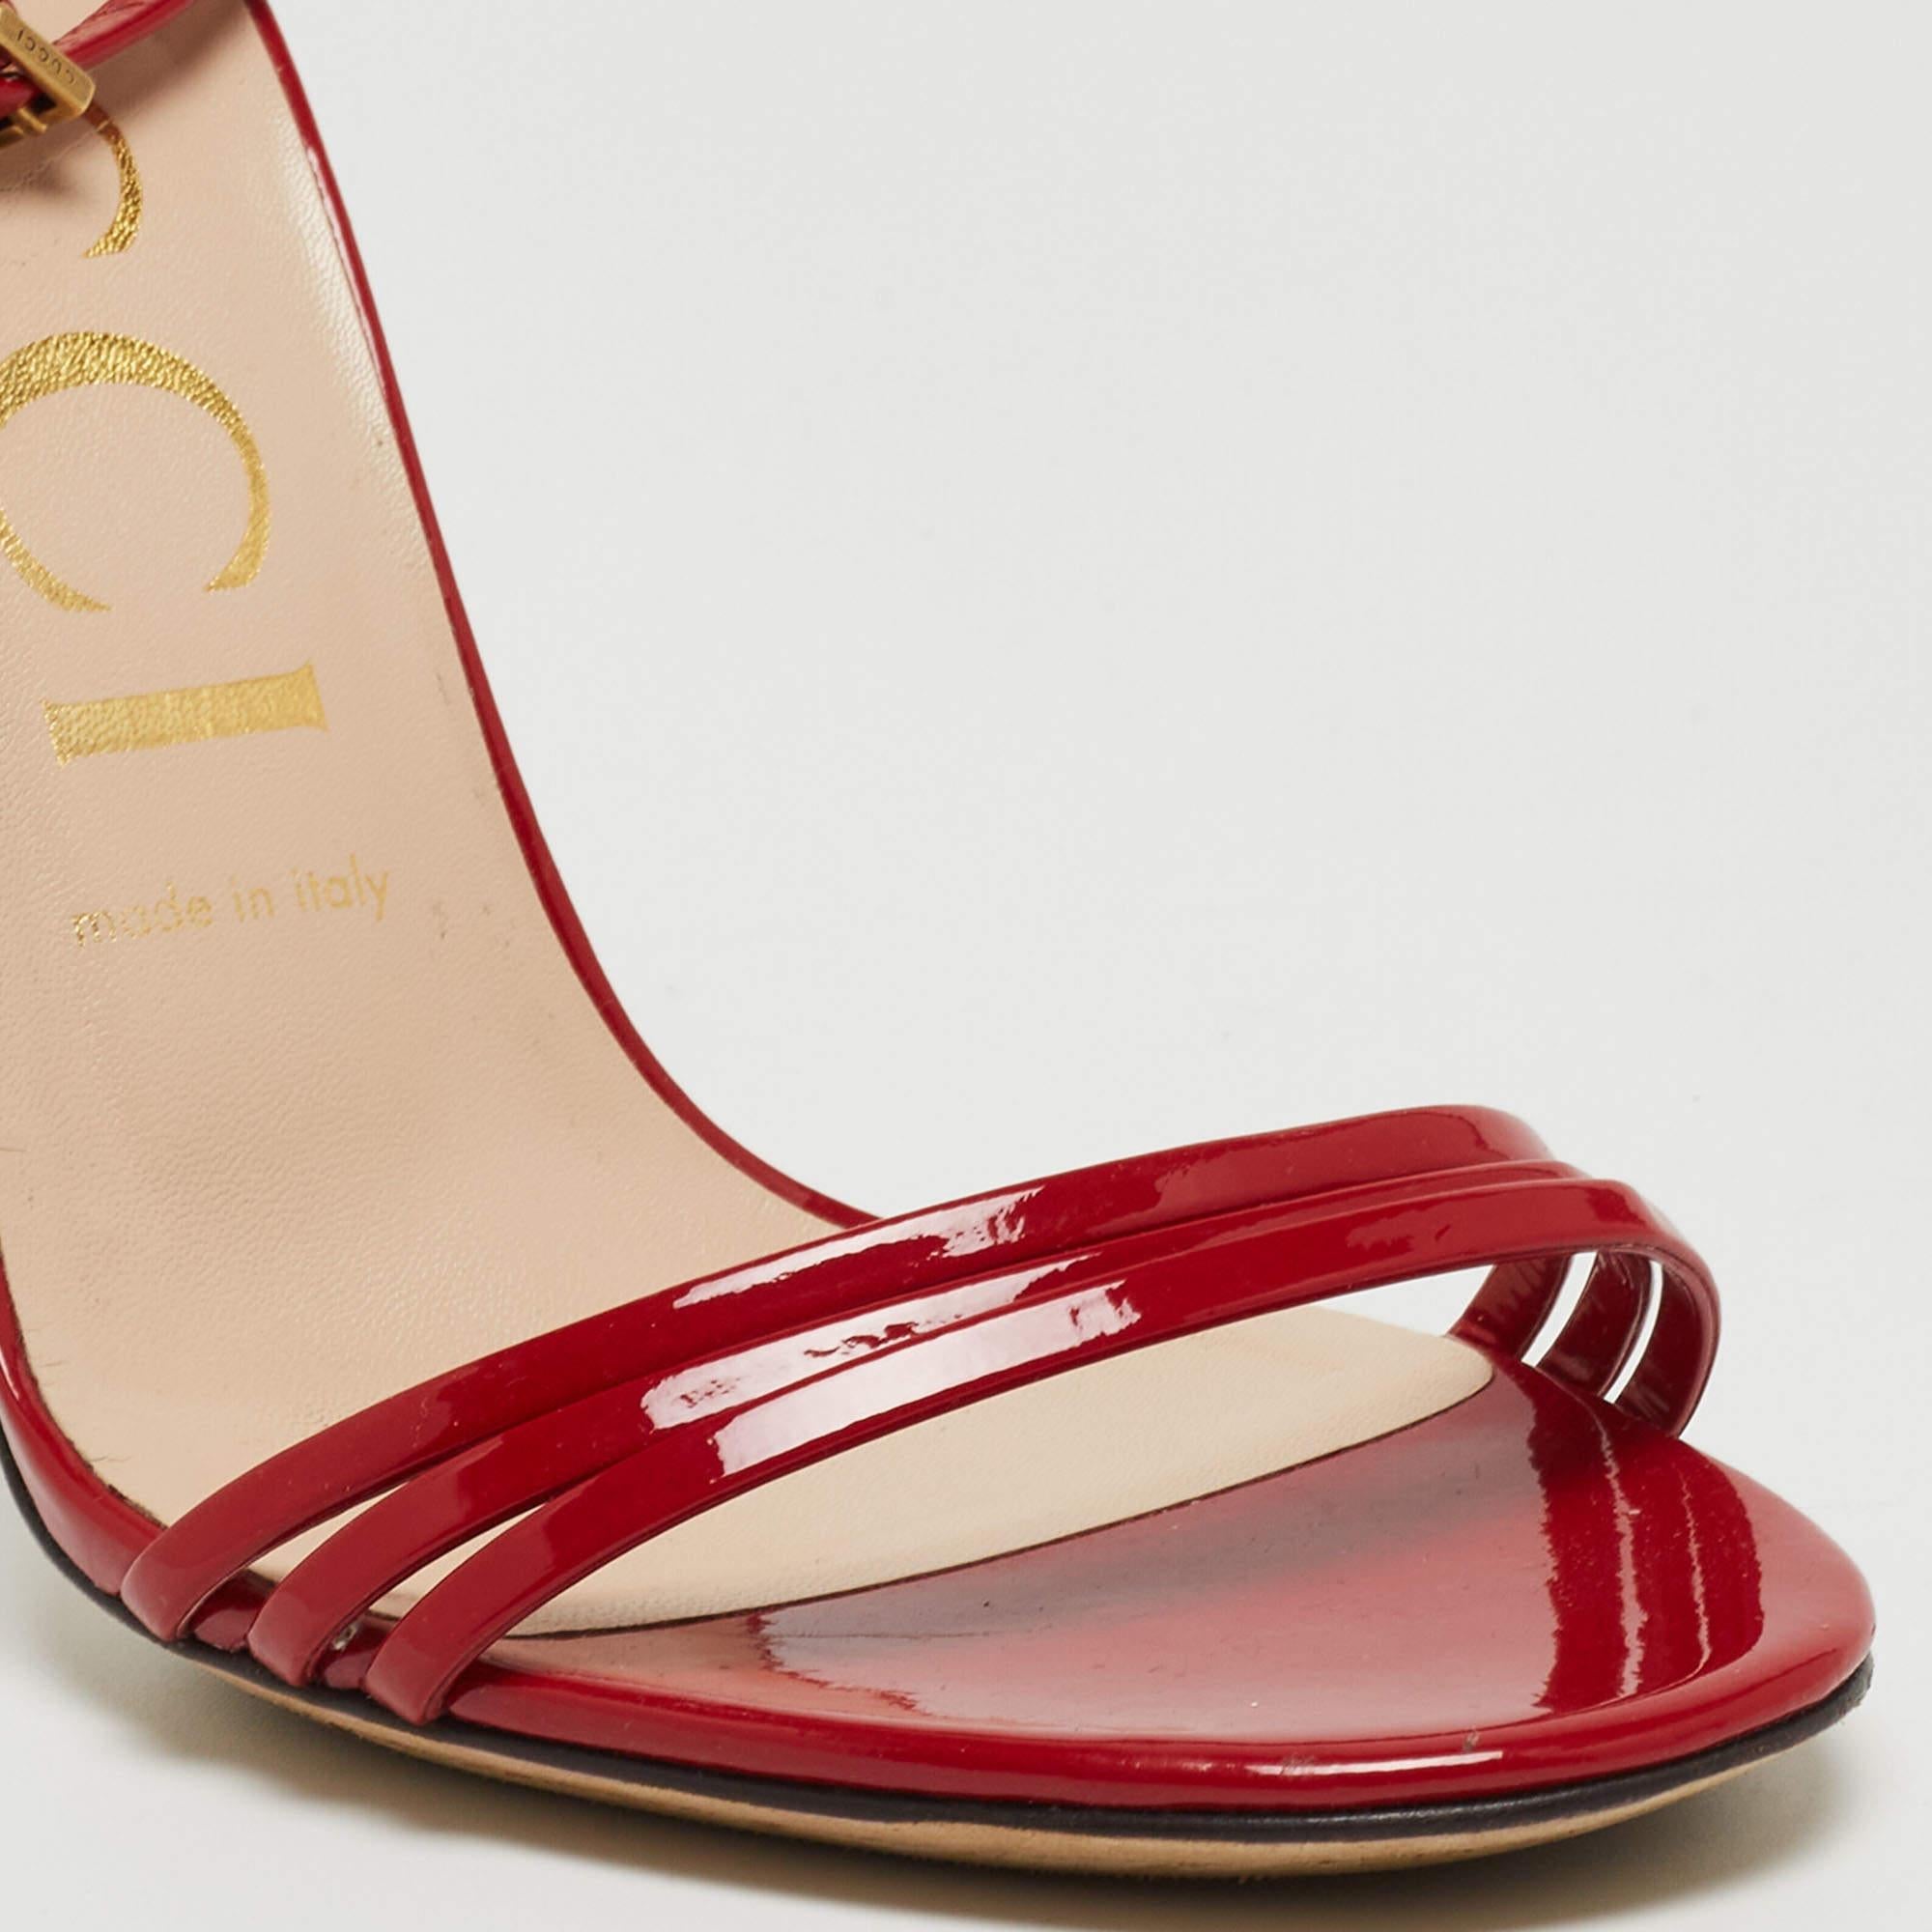 Gucci Red Patent Leather Ilse Ankle Strap Sandals Size 38 3